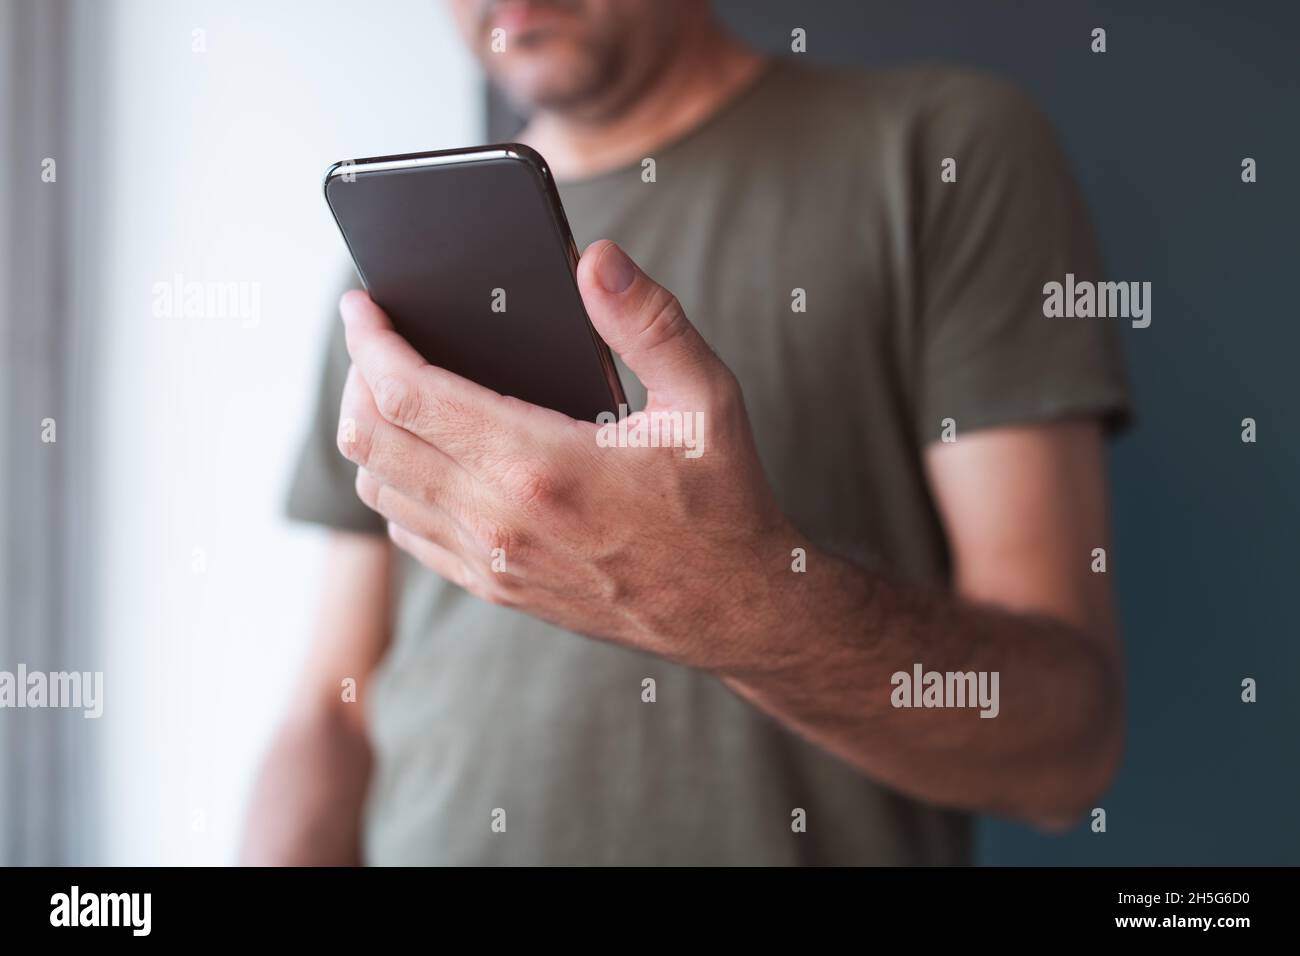 Man reading text message on mobile smart phone, selective focus on hand and device Stock Photo